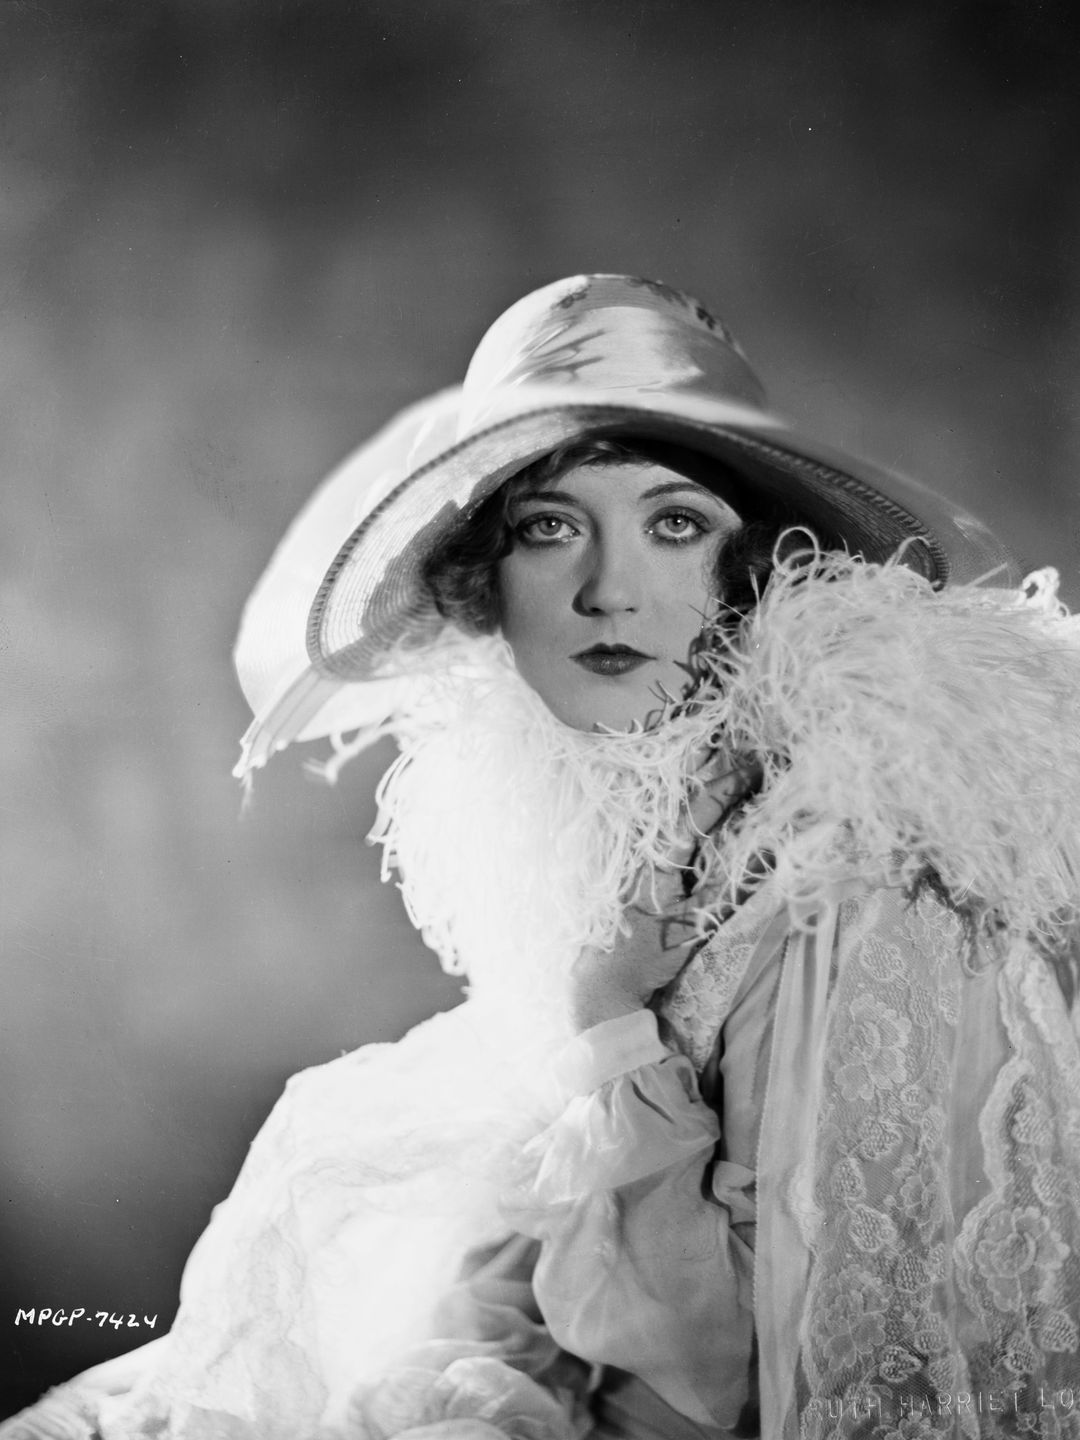 Marion Davies wears a wide-brimmed hat and feathered shawl